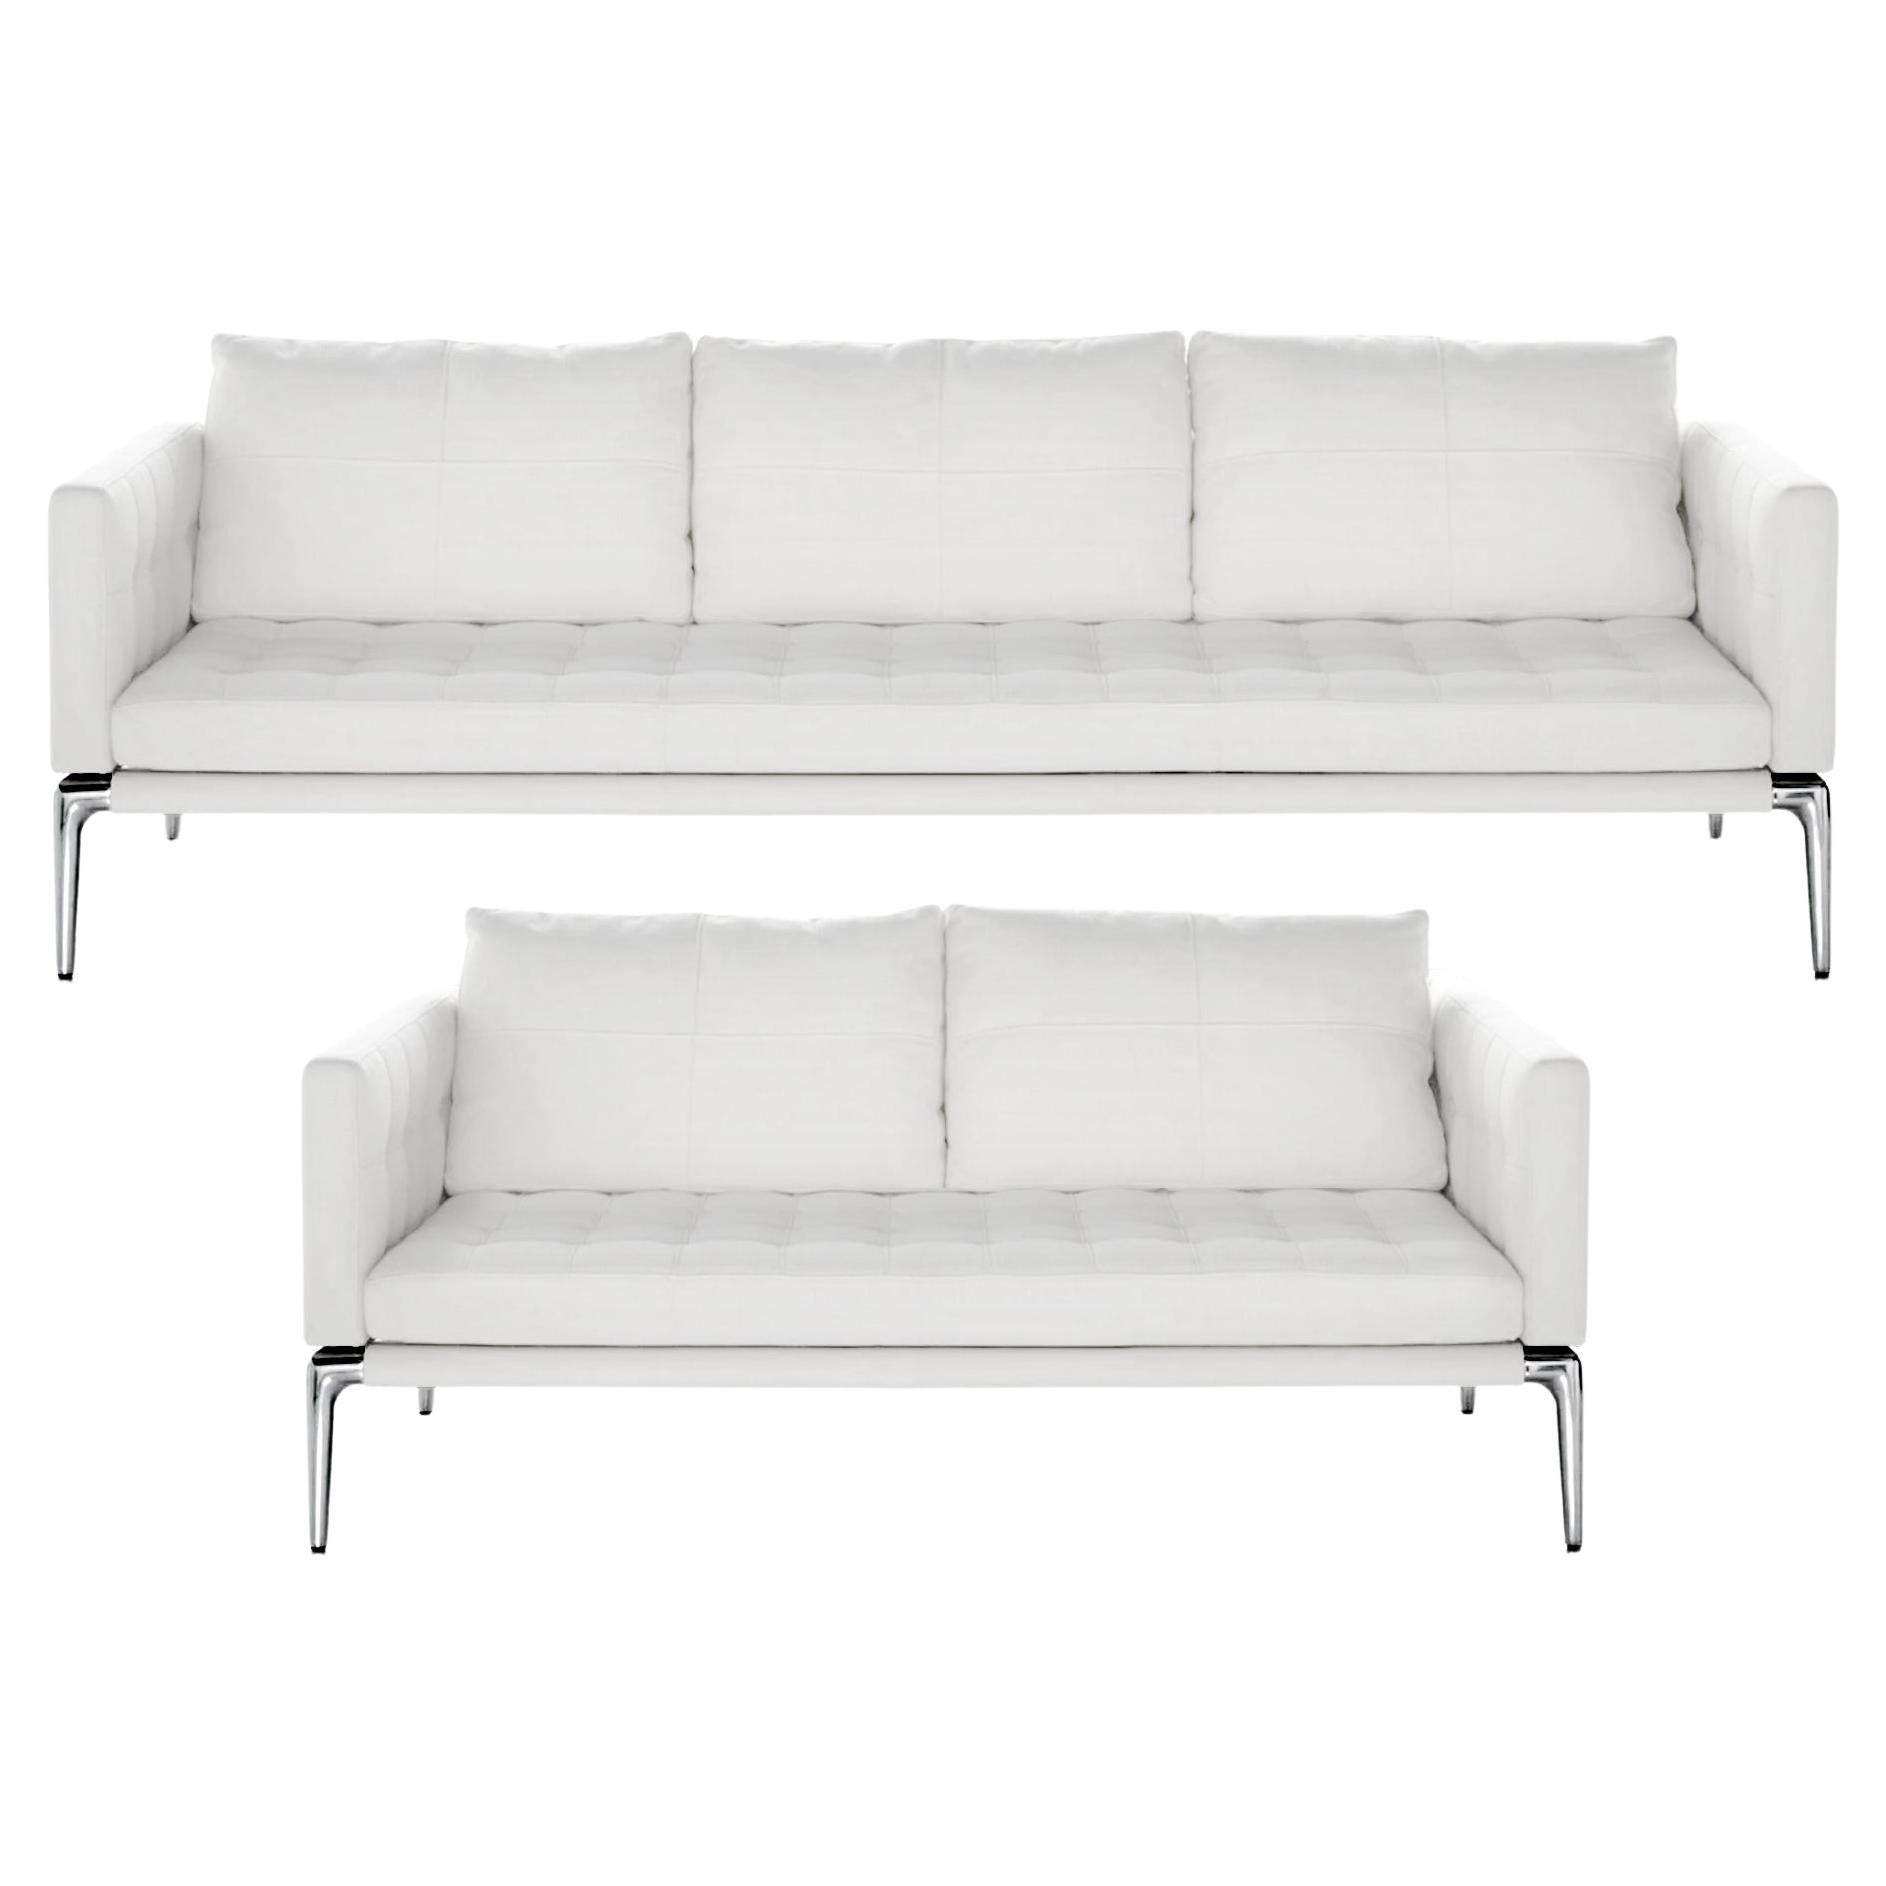 Cassina & Philippe Starck - Pair of Sofas Volage White Leather